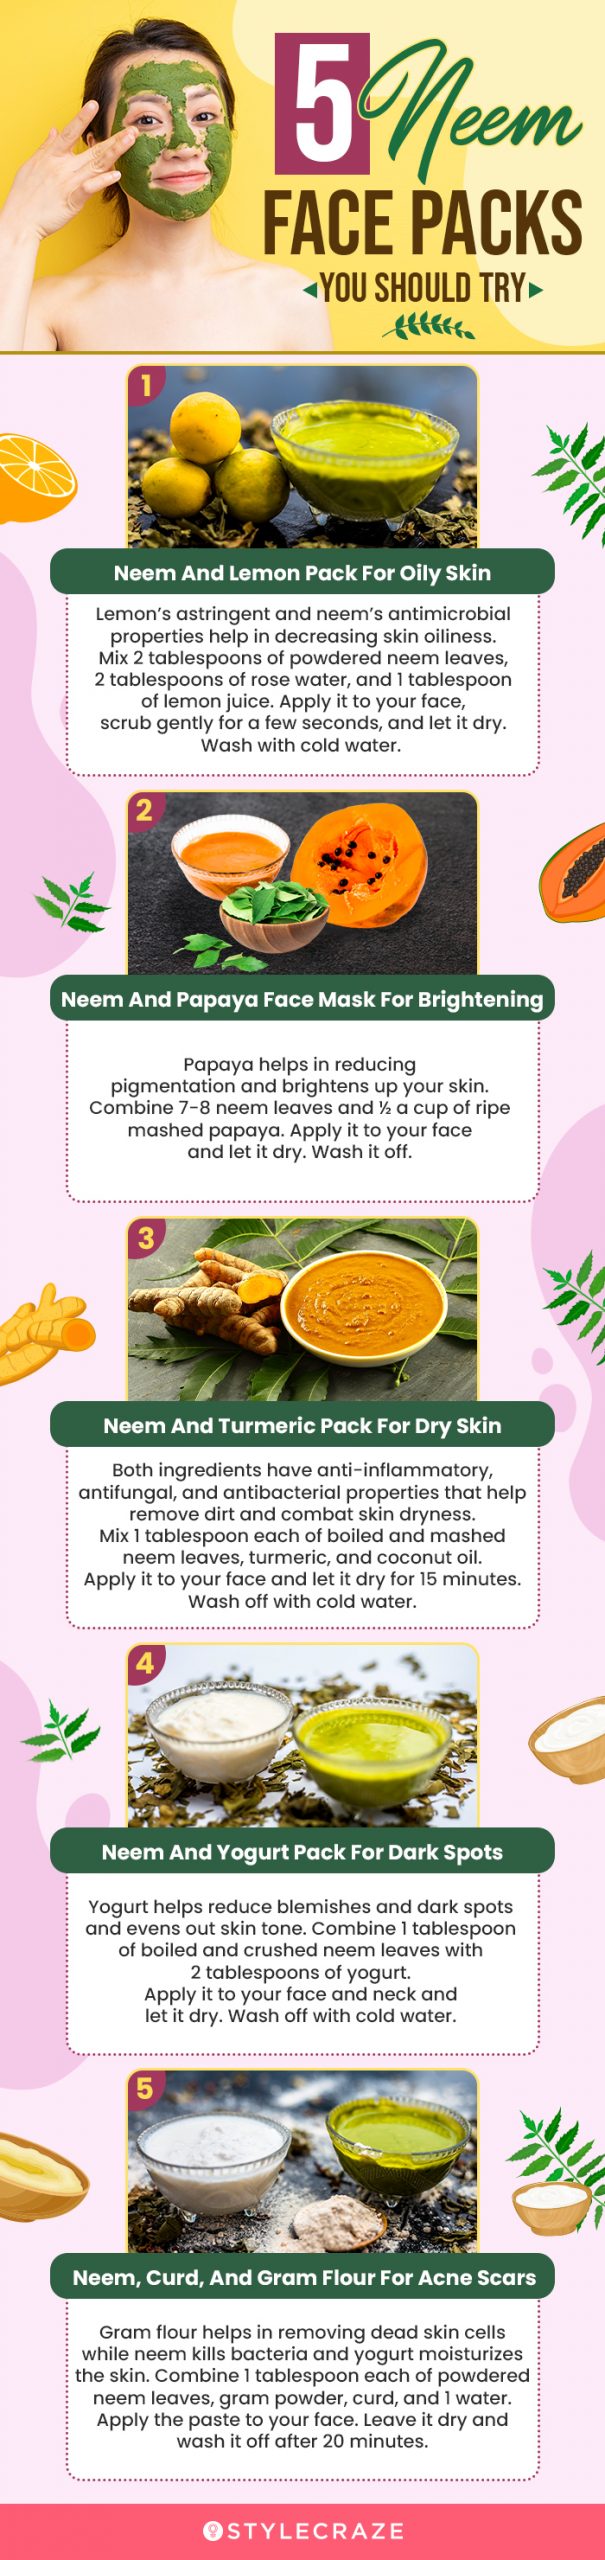 5 neem face packs you should try (infographic)